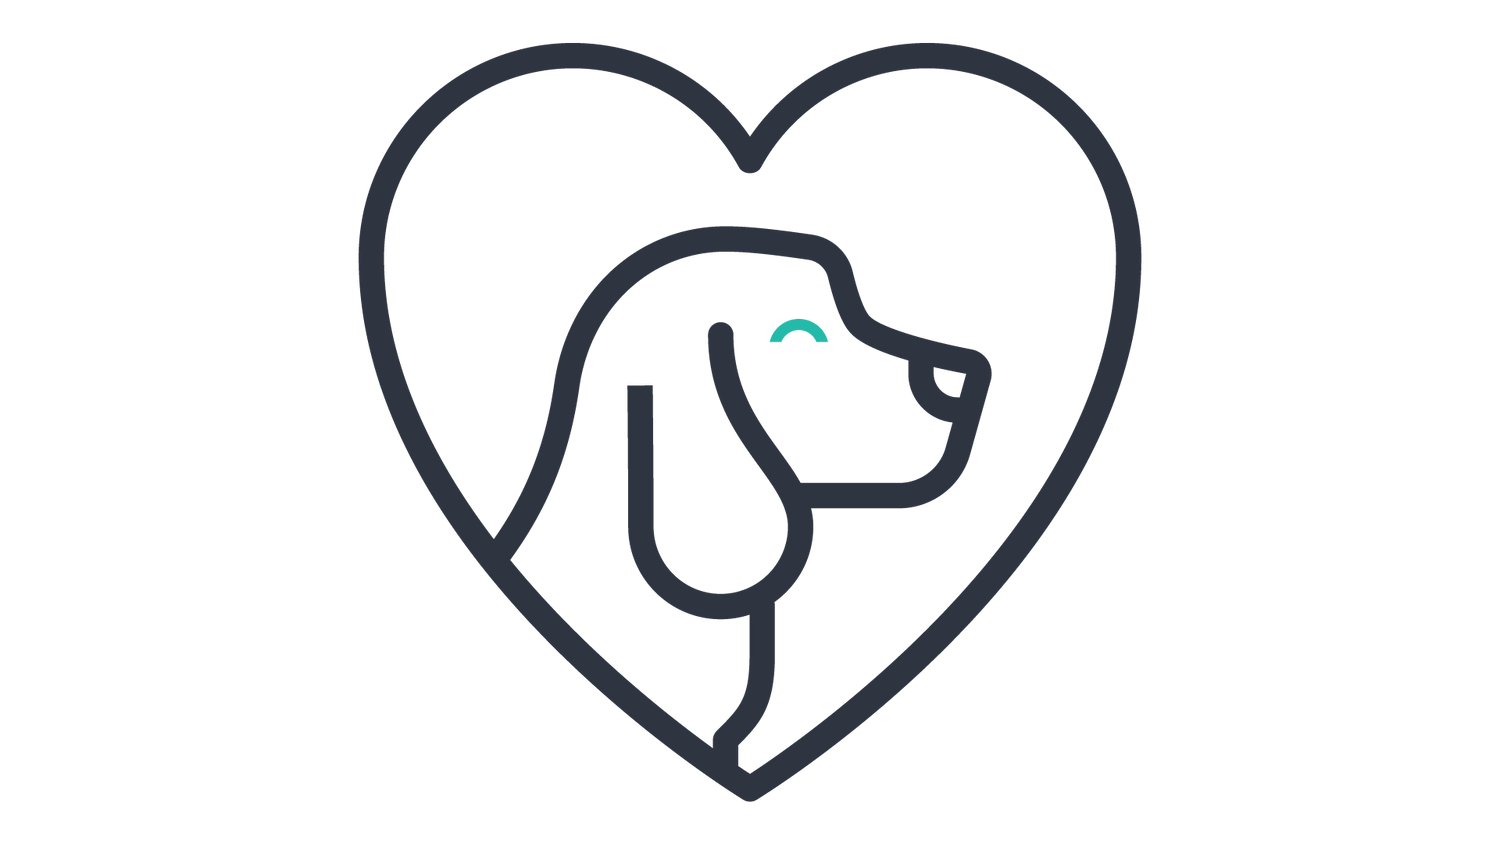 Icon of a dogs head in a heart shape